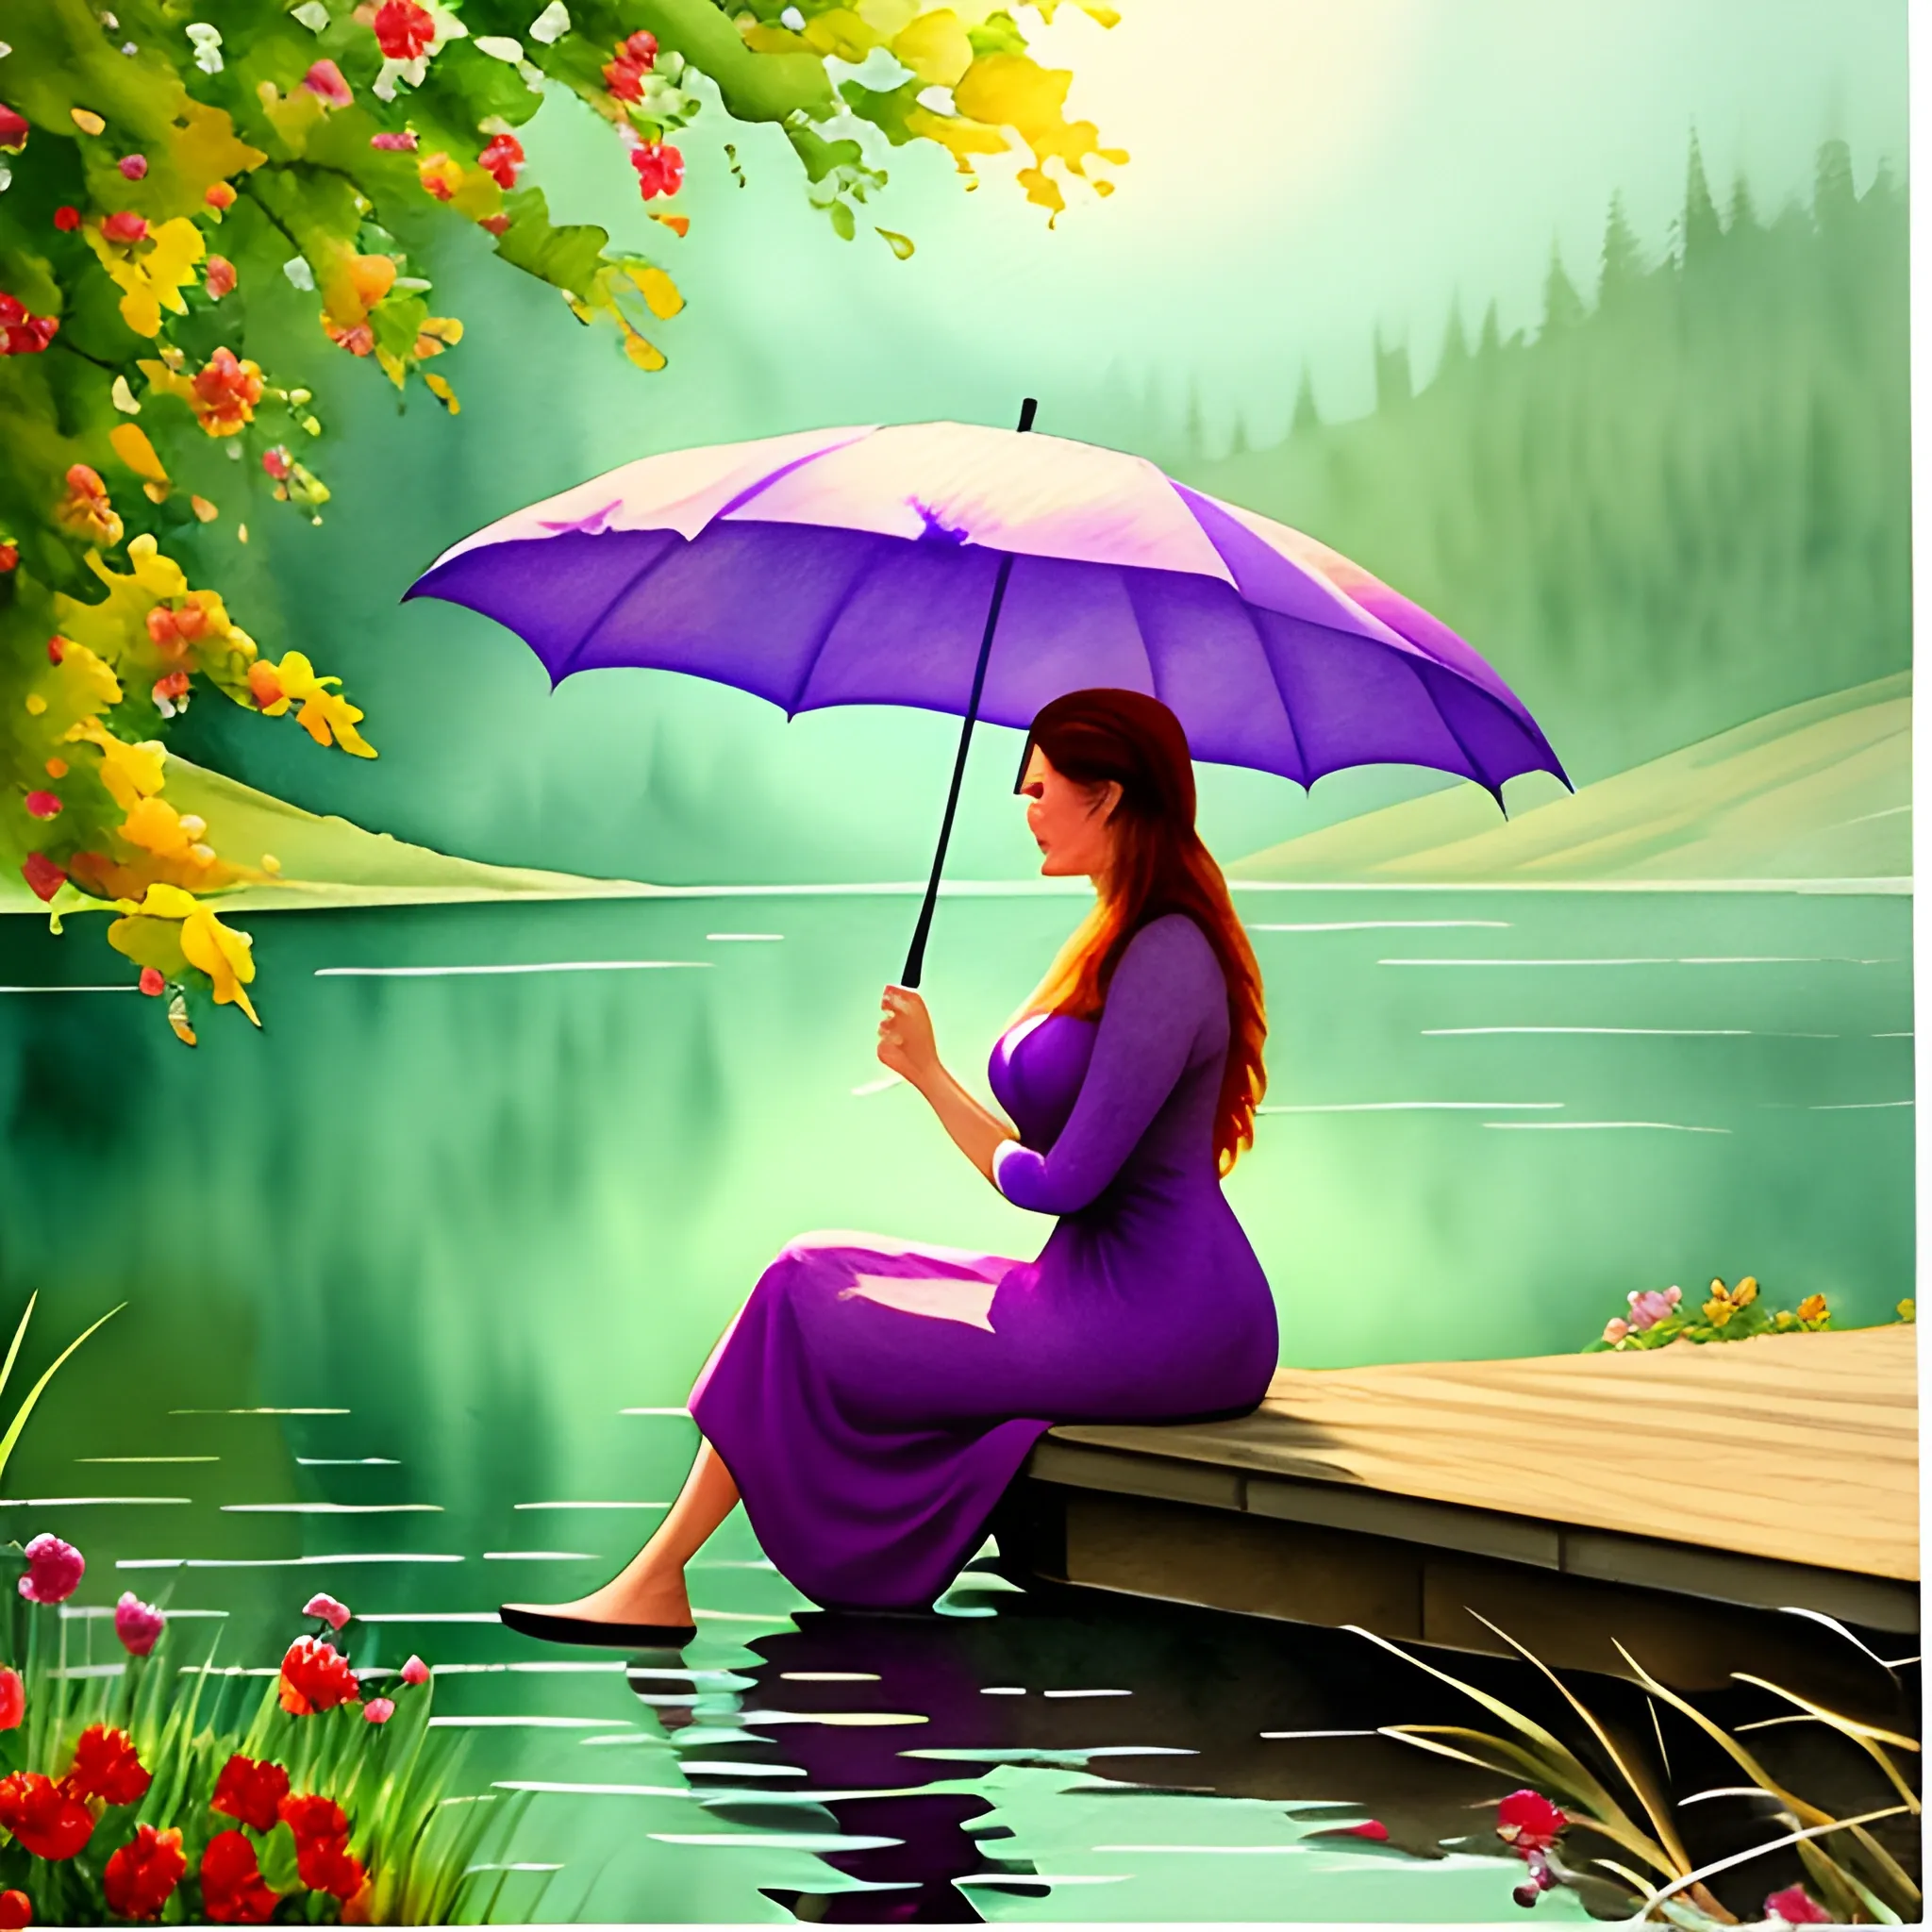 watercolor painting of flowers by the lake, dramatic lighting, peaceful, girl sitting, Umbrella in hand, Oil Paint, Funny